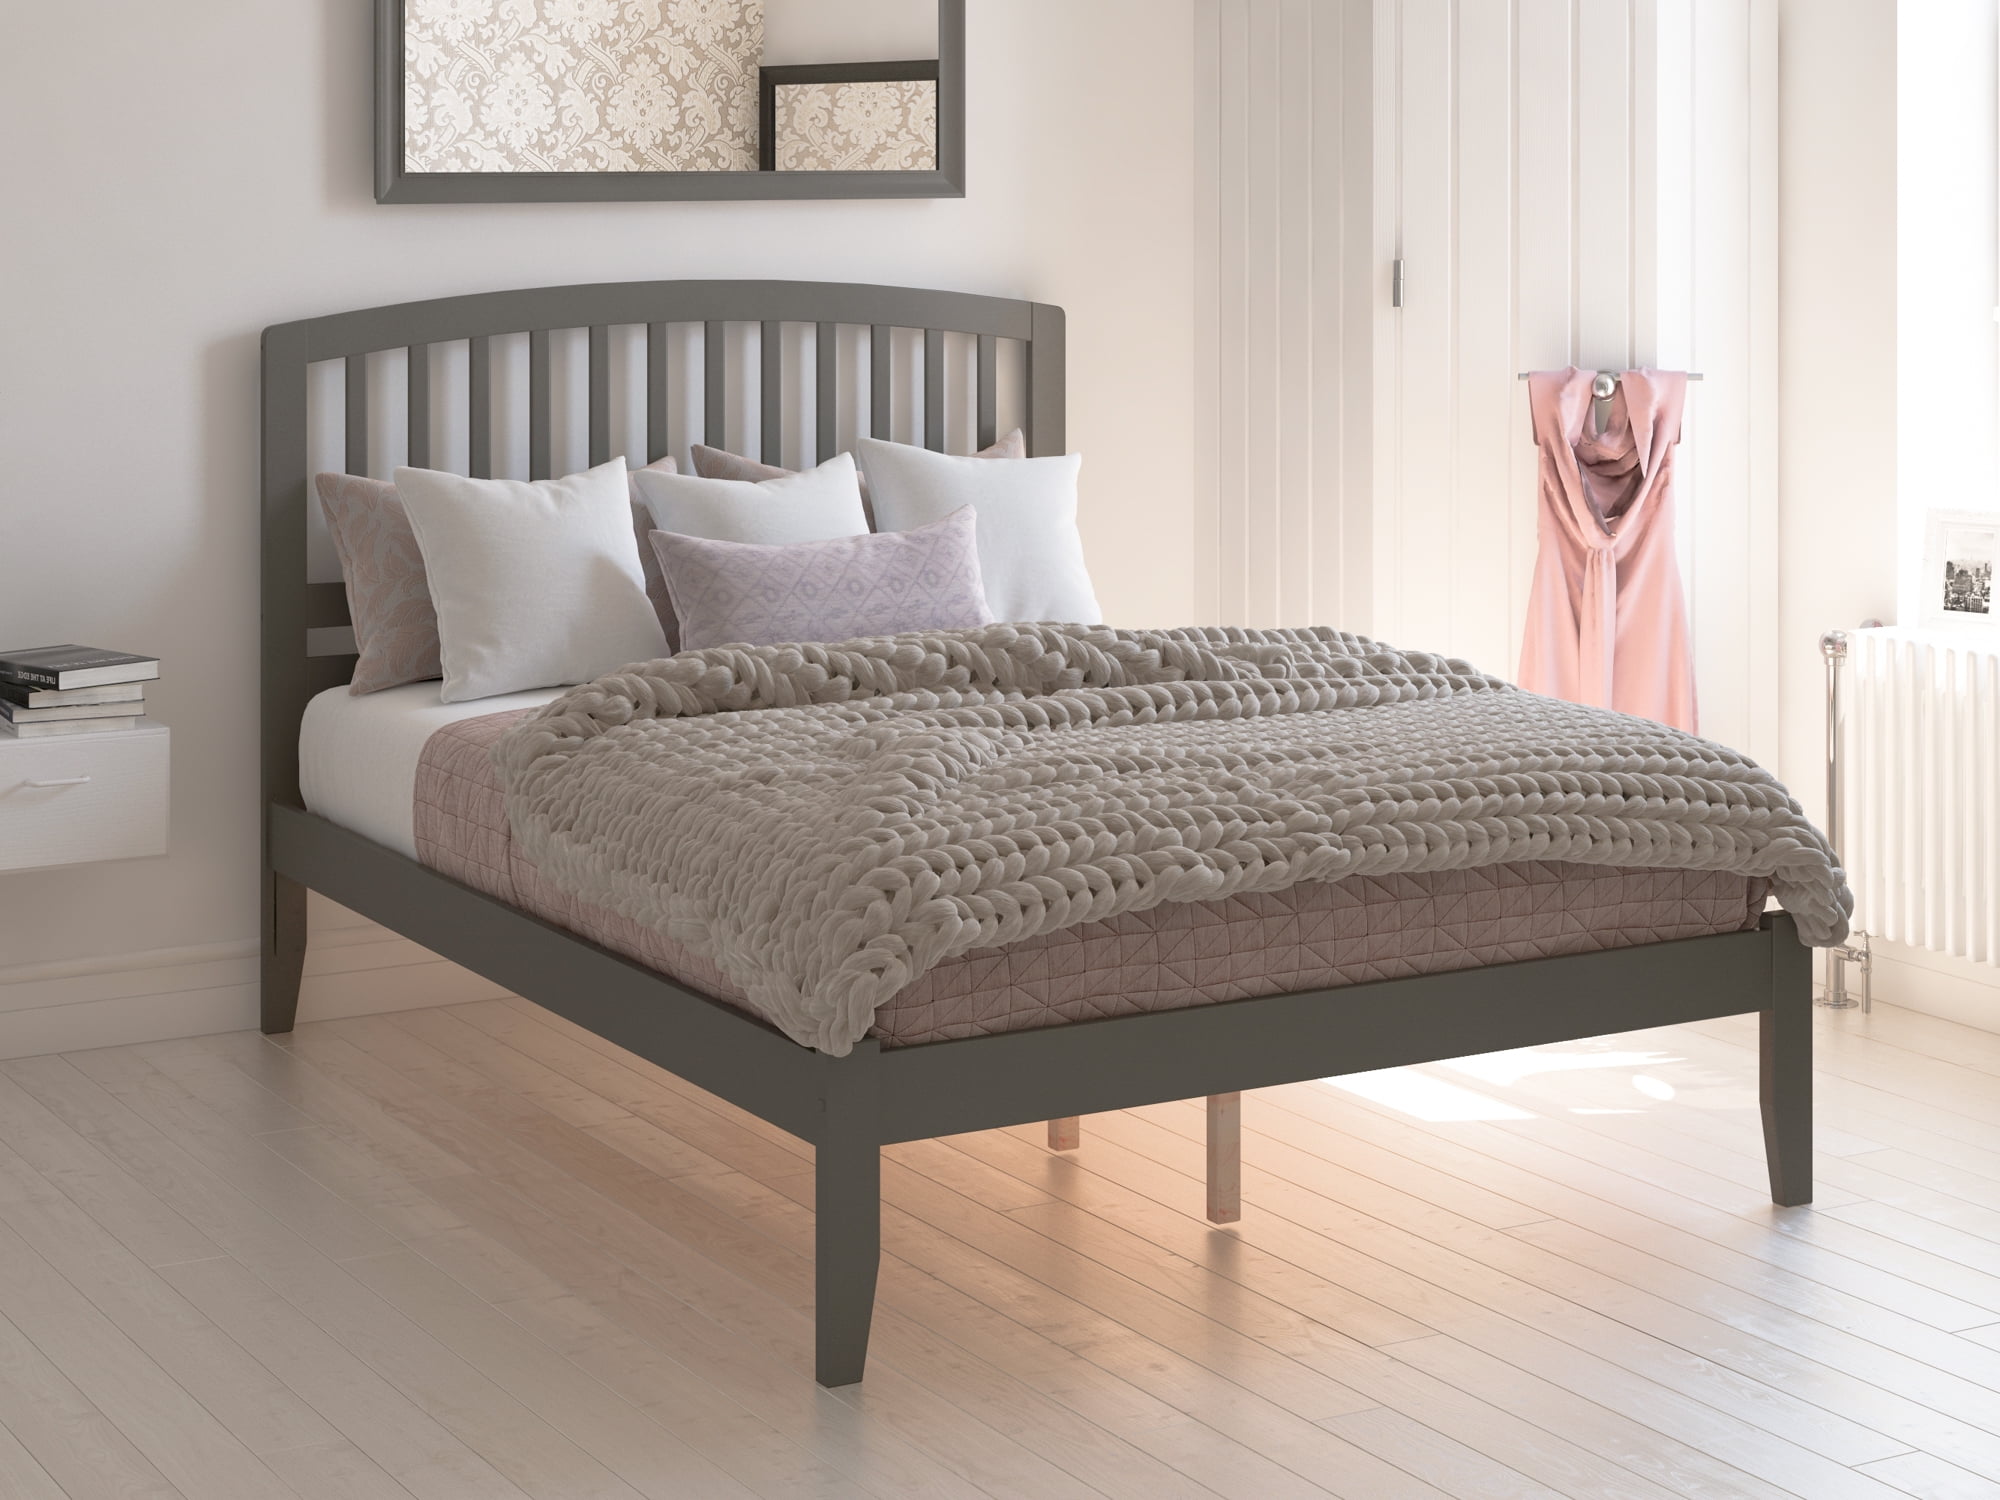 Picture of Atlantic Furniture AR8841009 62.63 x 82.5 x 50 in. Richmond Platform Bed with Open Foot Board in Grey - Queen Size